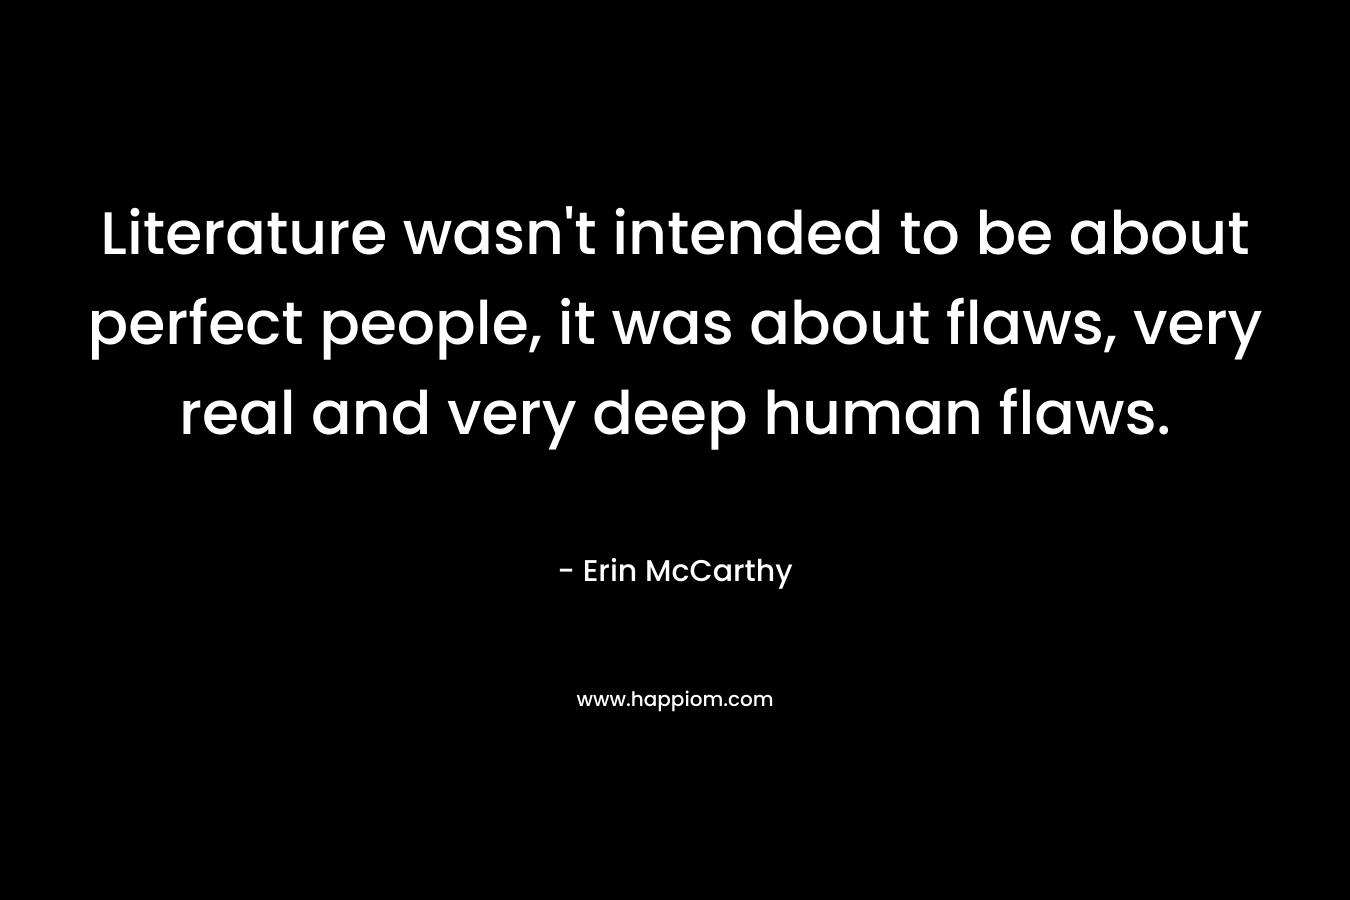 Literature wasn’t intended to be about perfect people, it was about flaws, very real and very deep human flaws. – Erin McCarthy